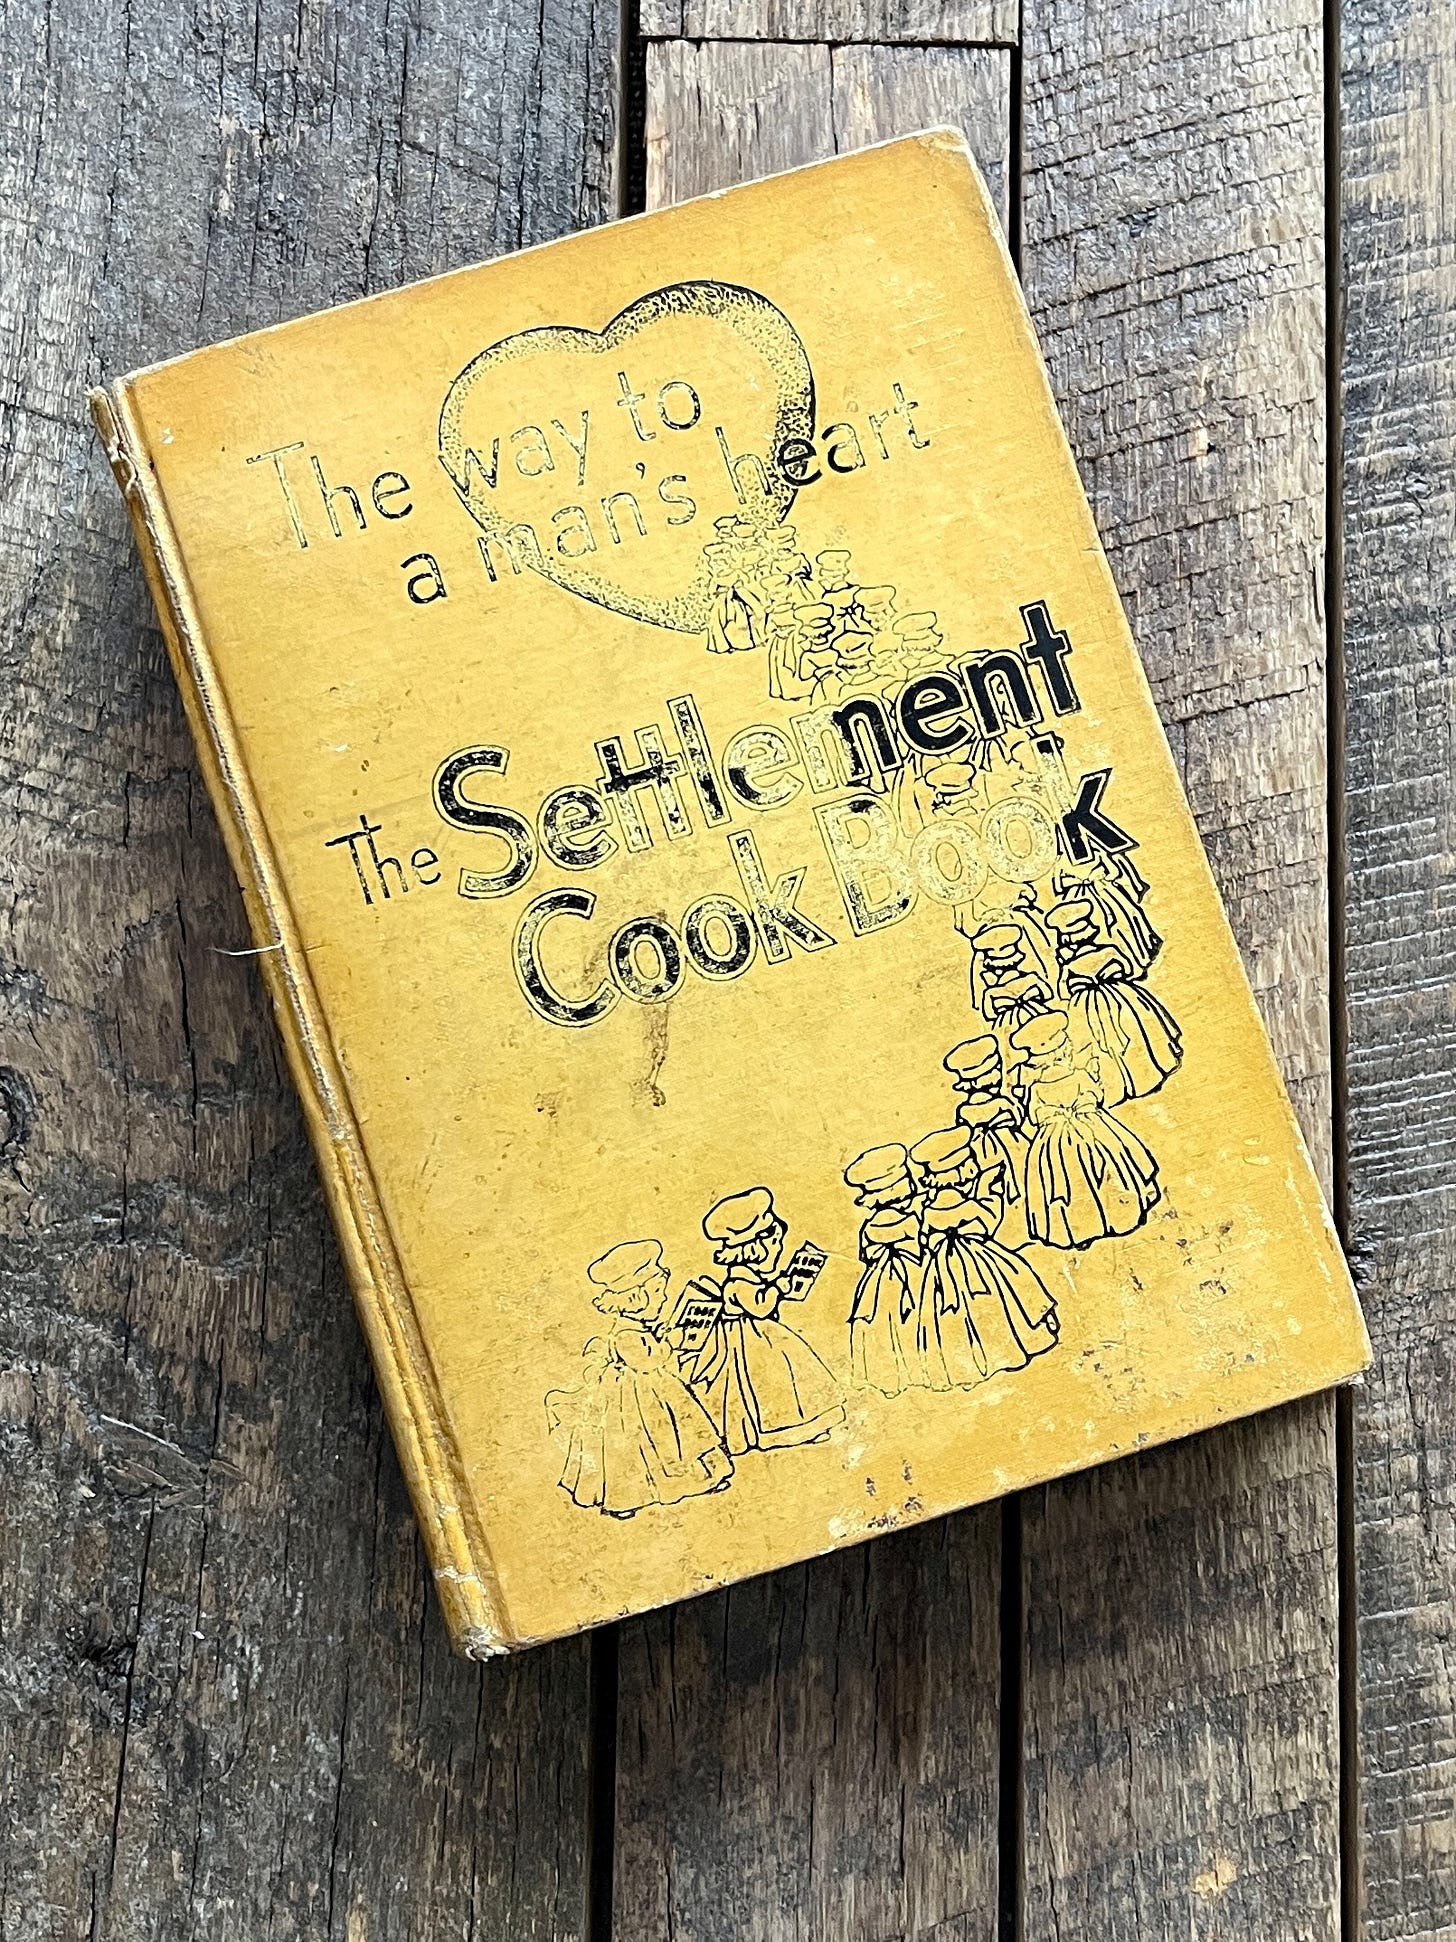 The way to a man's heart: The Settlement Cook Book cover